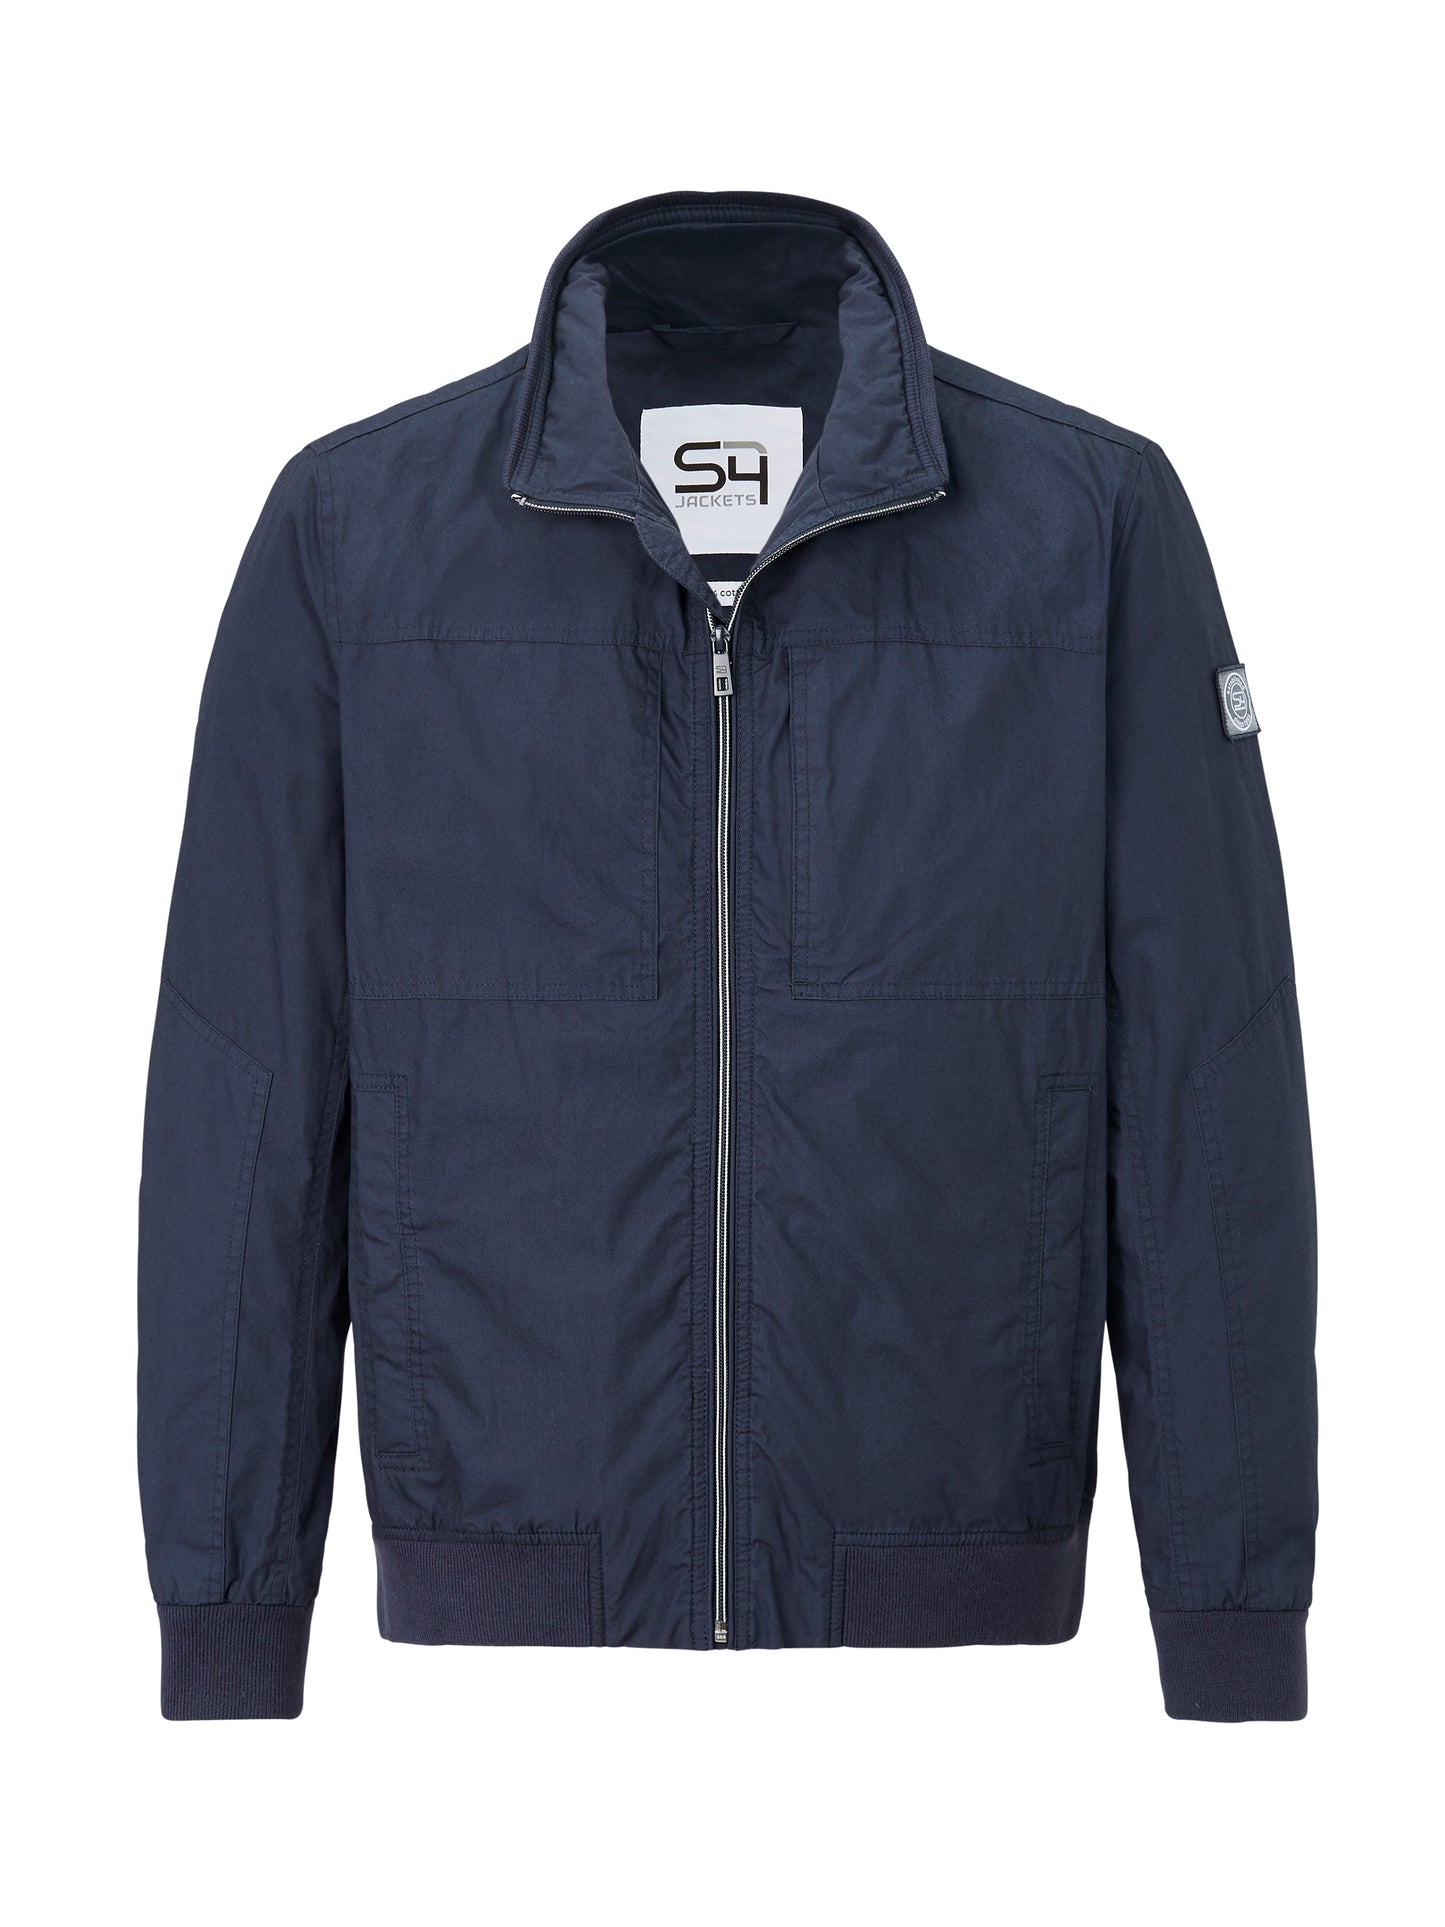 Navy cotton jacket with zip and two big pockets from German brand S4 available at StylishGuy Menswear Dublin